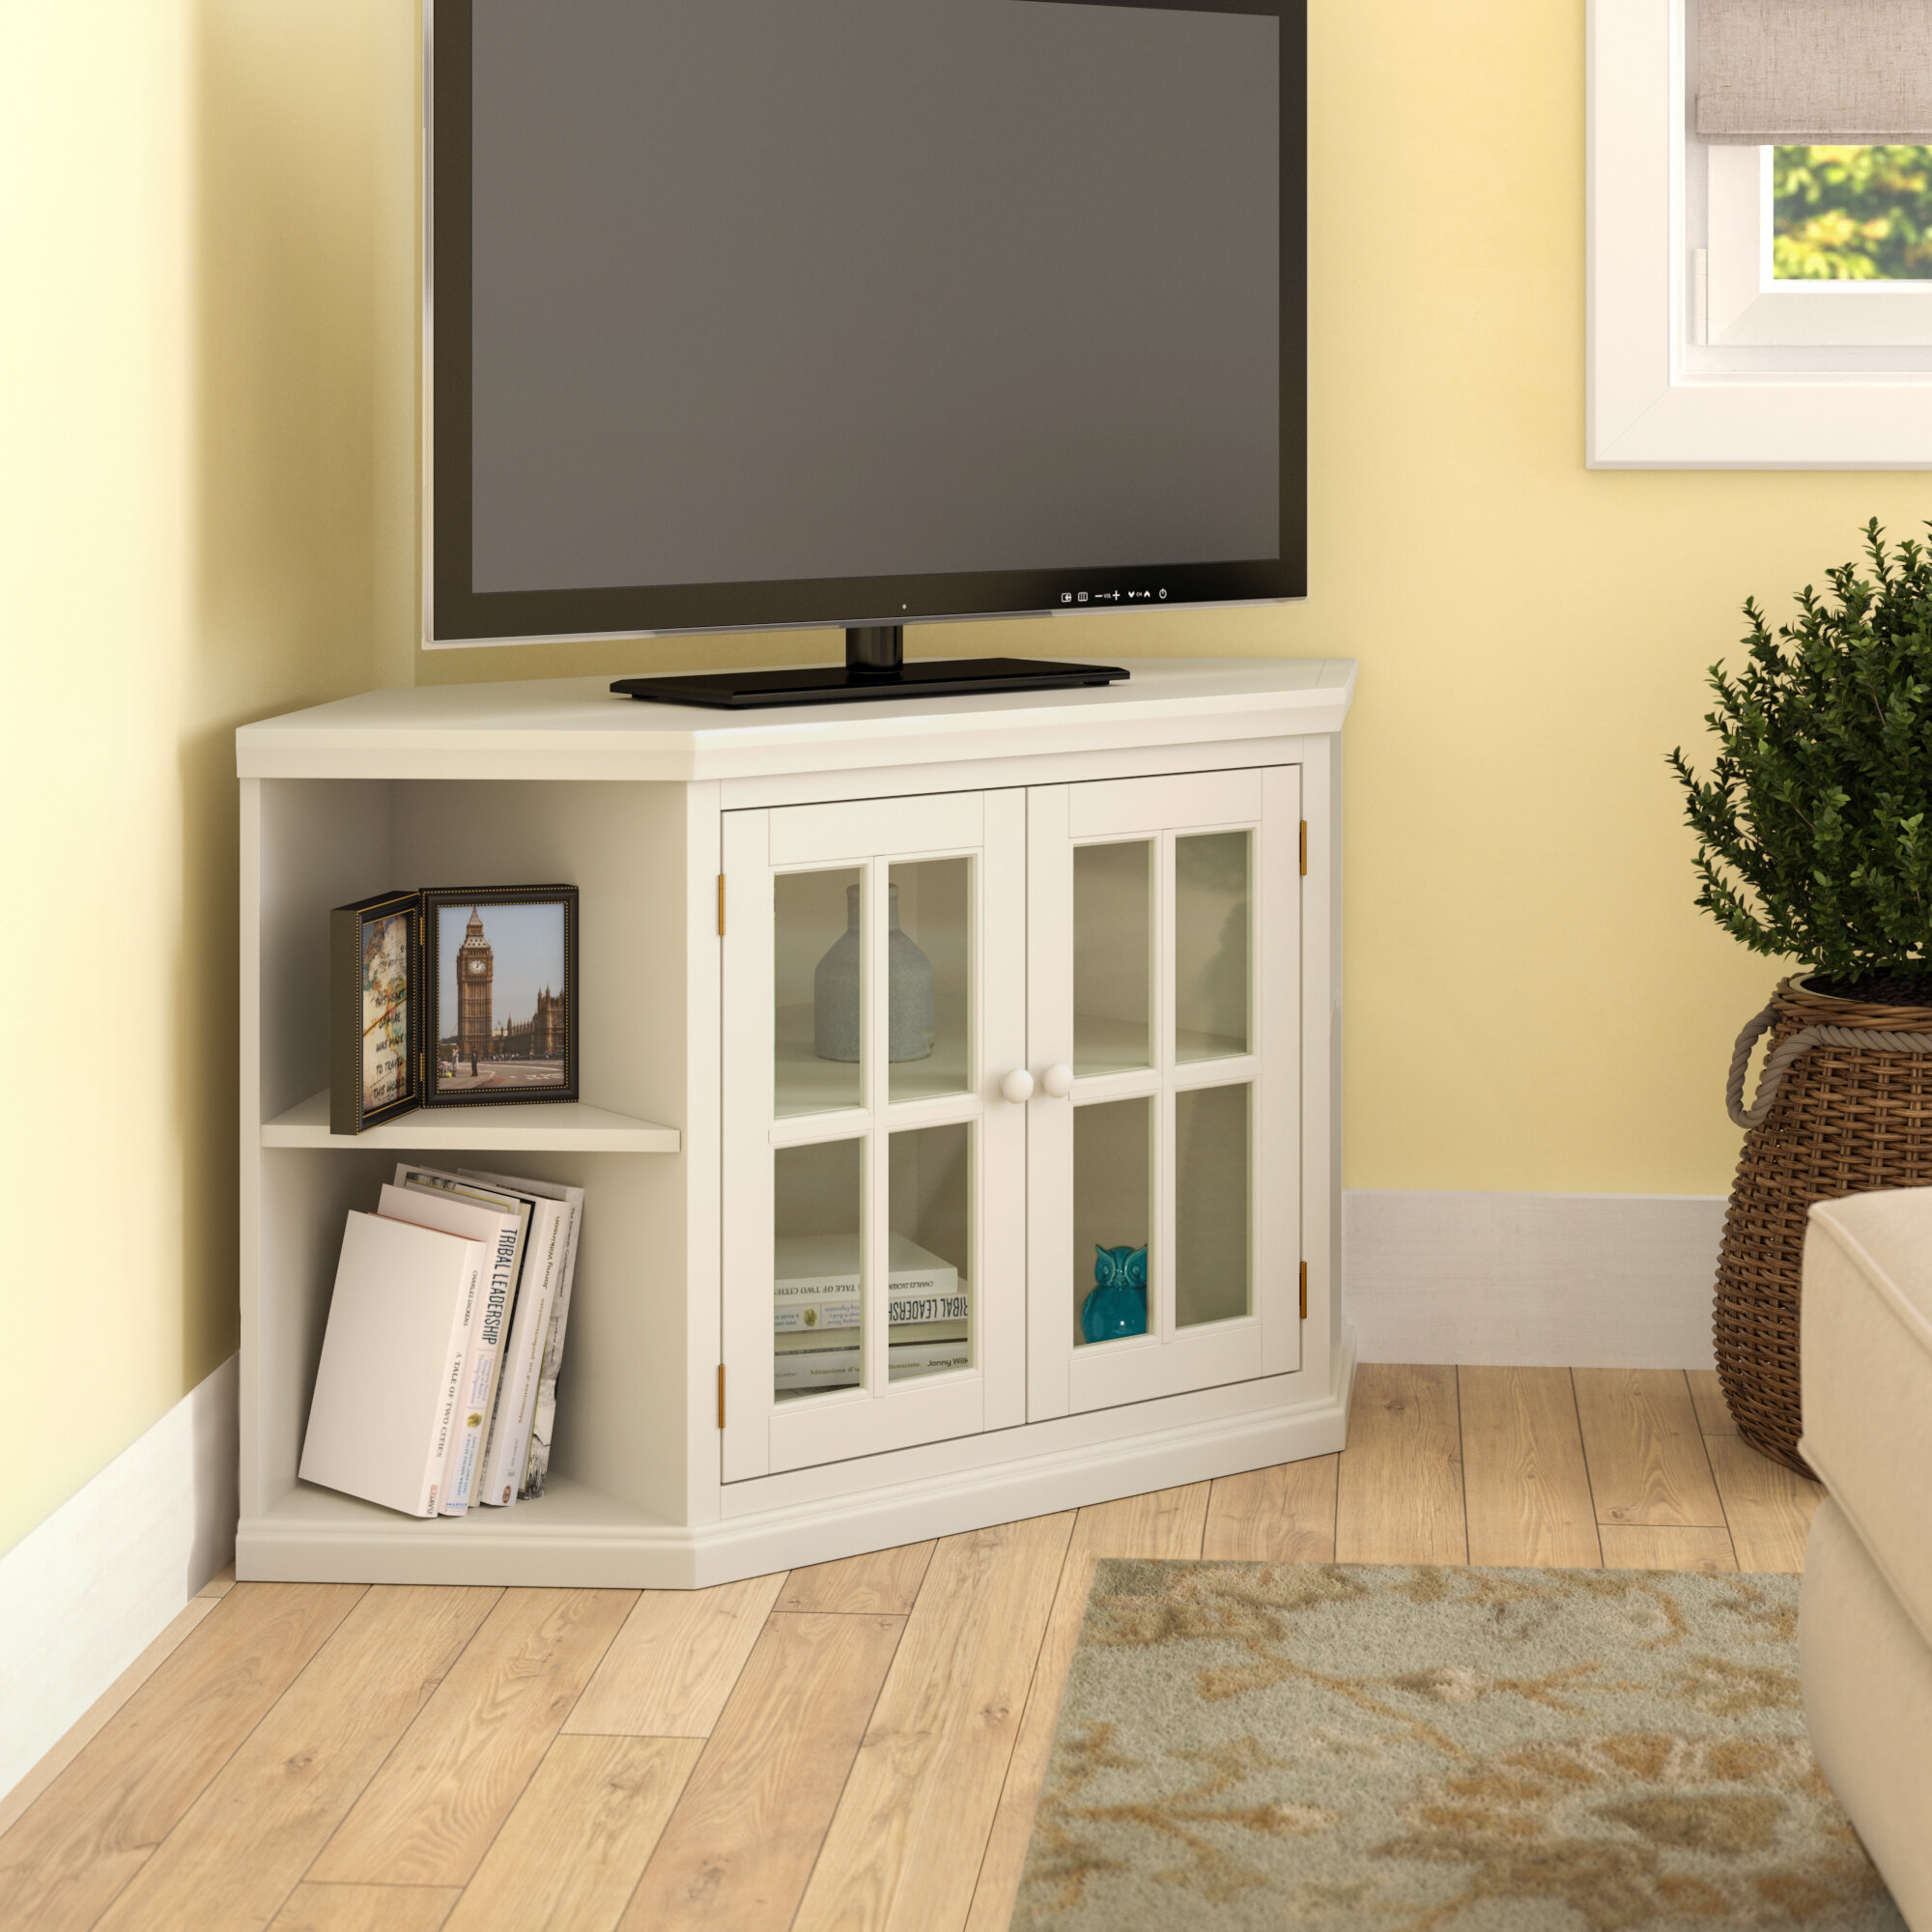 Carnesville Corner Tv Stand For Tvs Up To 50 